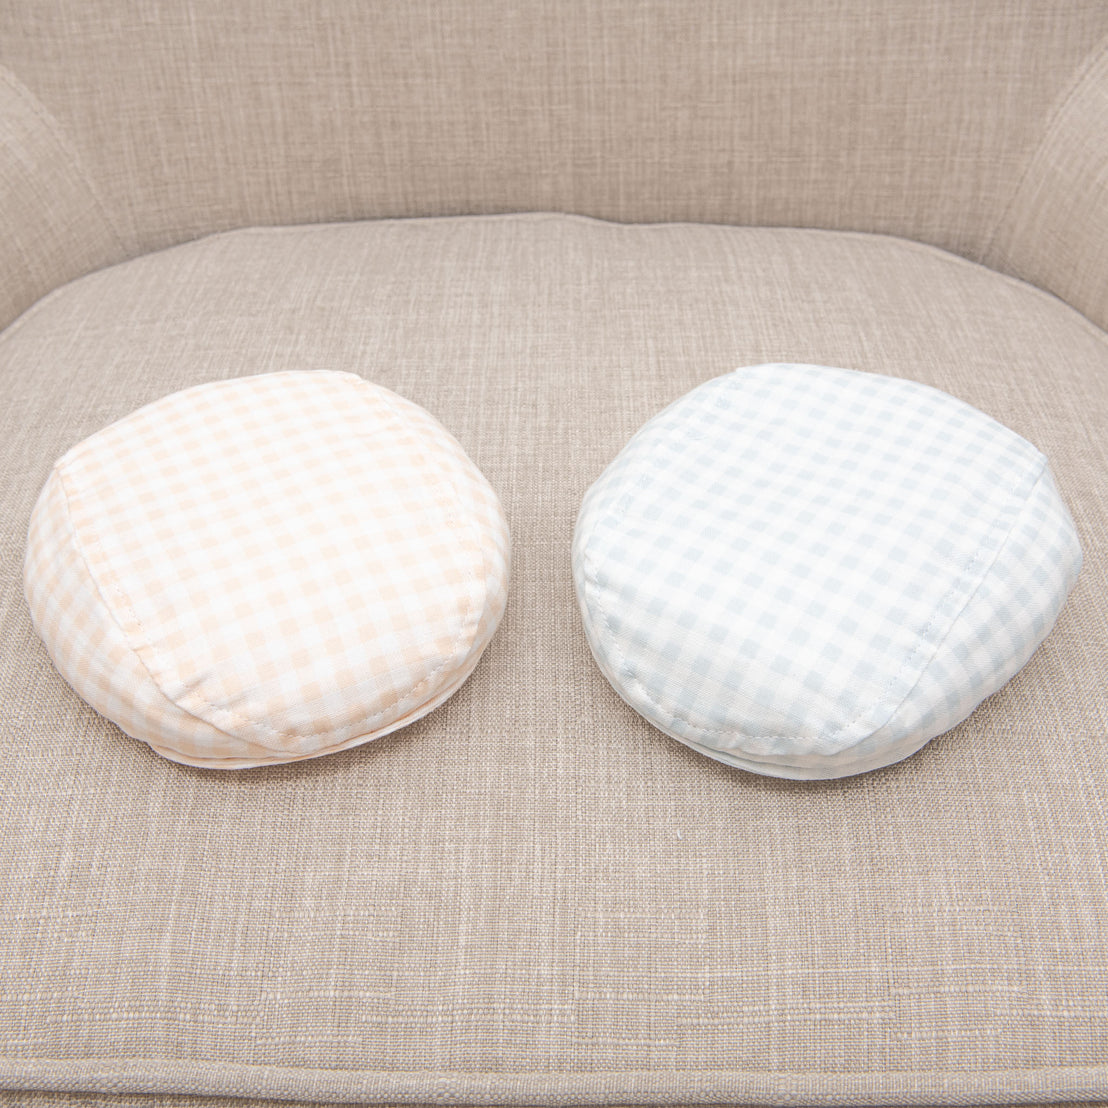 Two Ian Checked Newsboy Caps, one beige and white checked and one light blue and white checked, placed side by side on a traditional beige textured sofa.